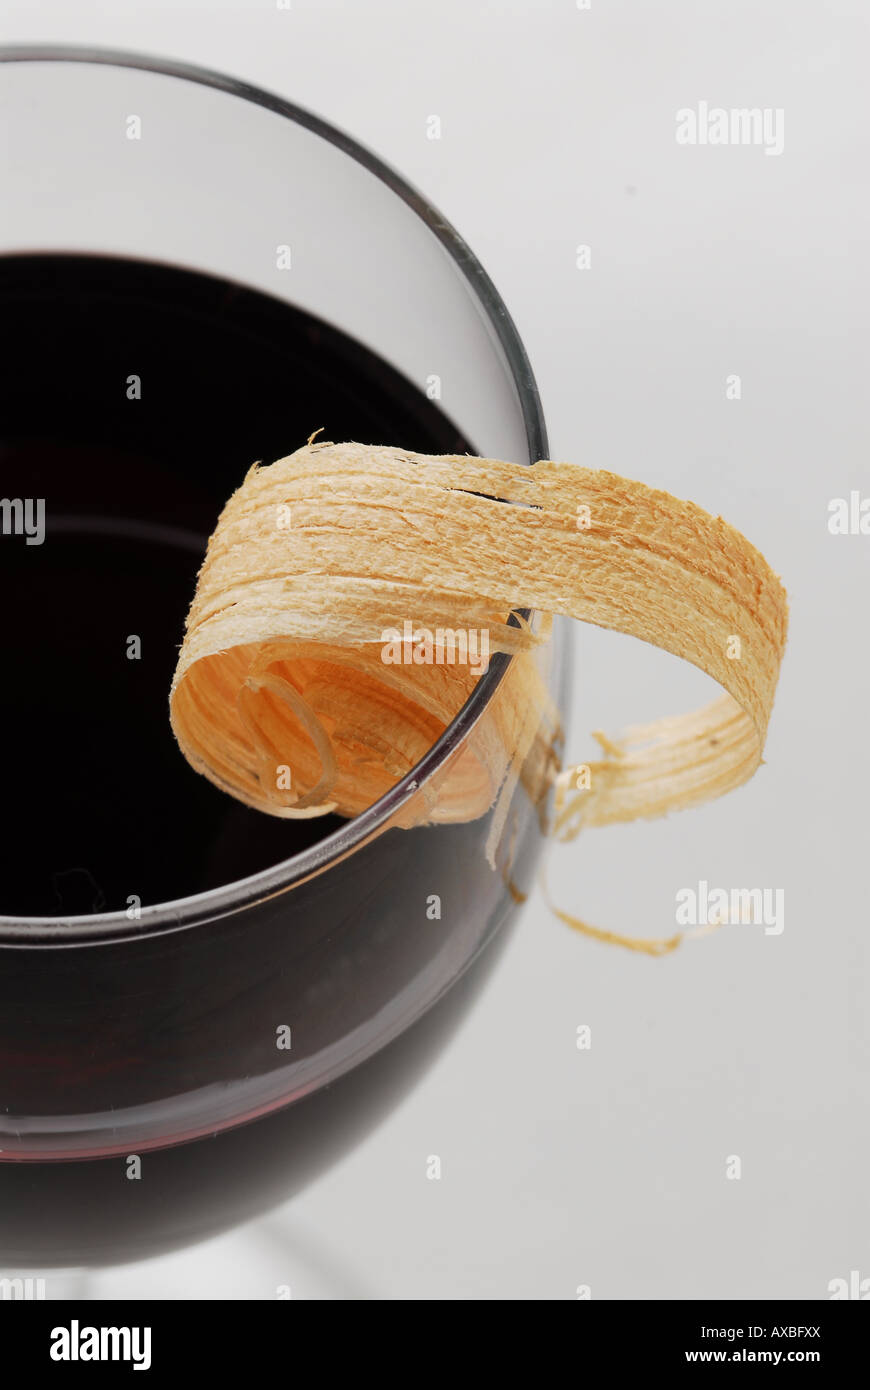 Wood shaving and red wine Stock Photo